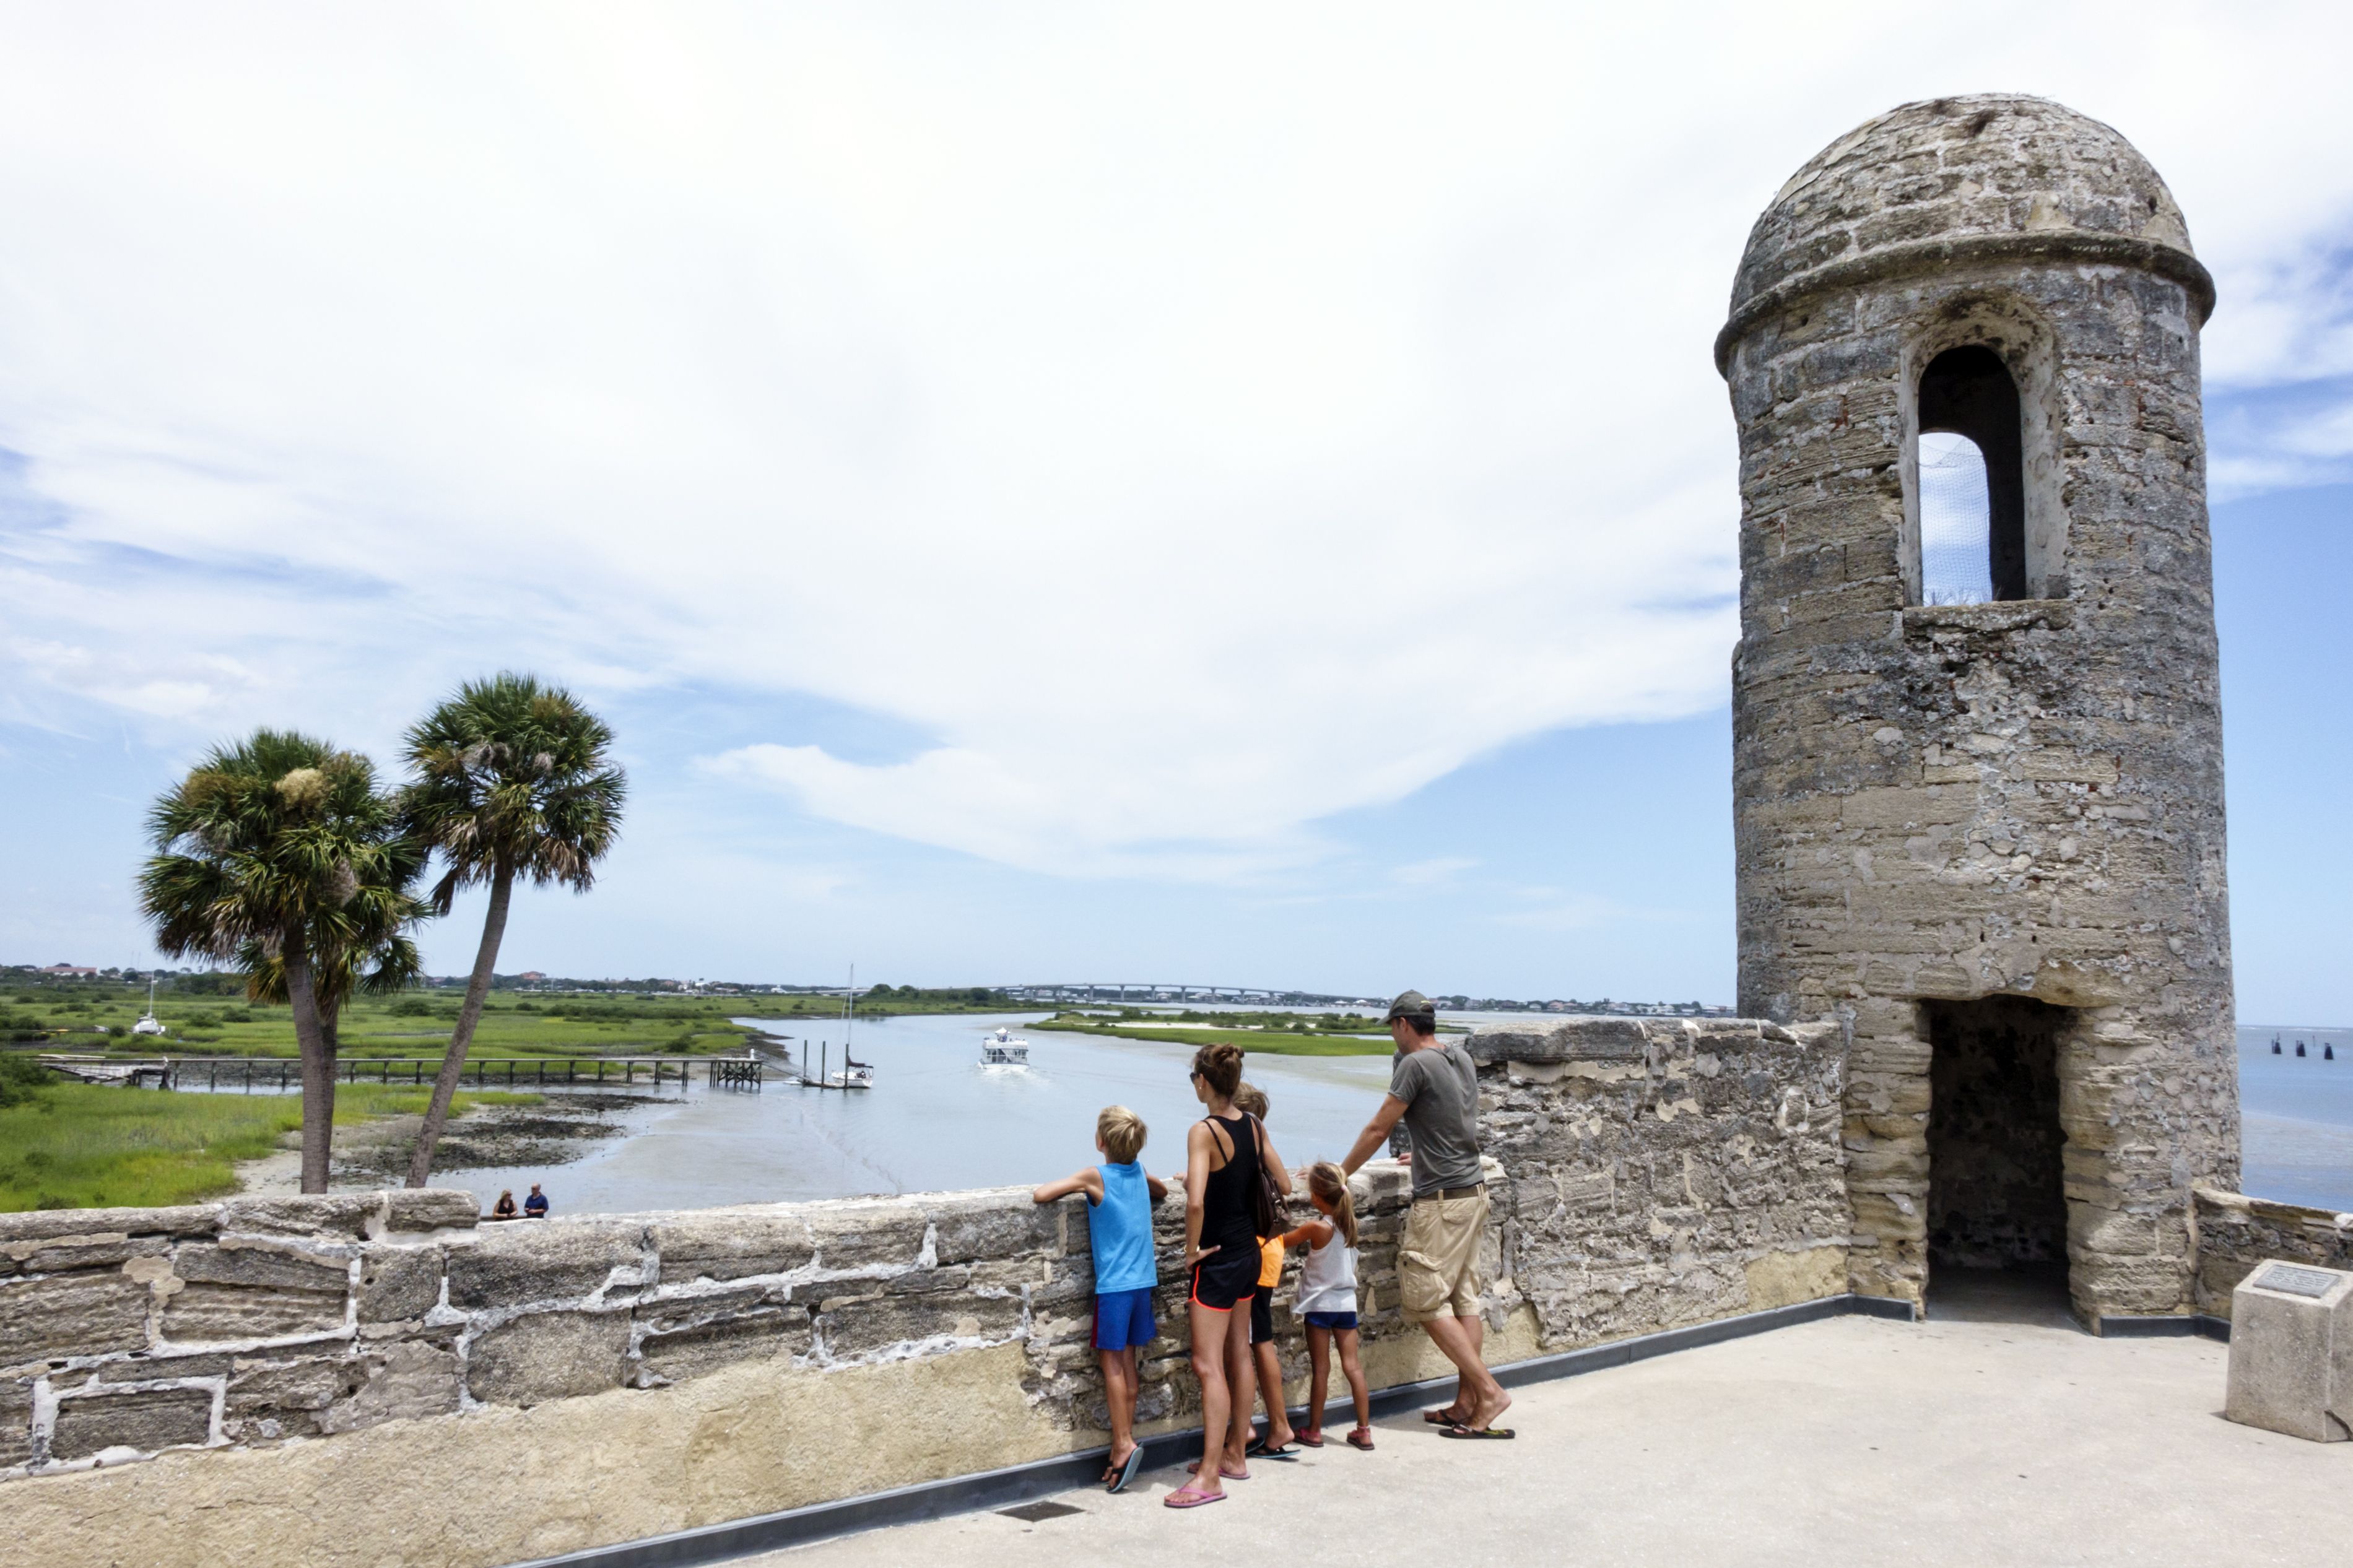 A family at the sentry post at the Castillo de San Marcos National Monument in Florida.